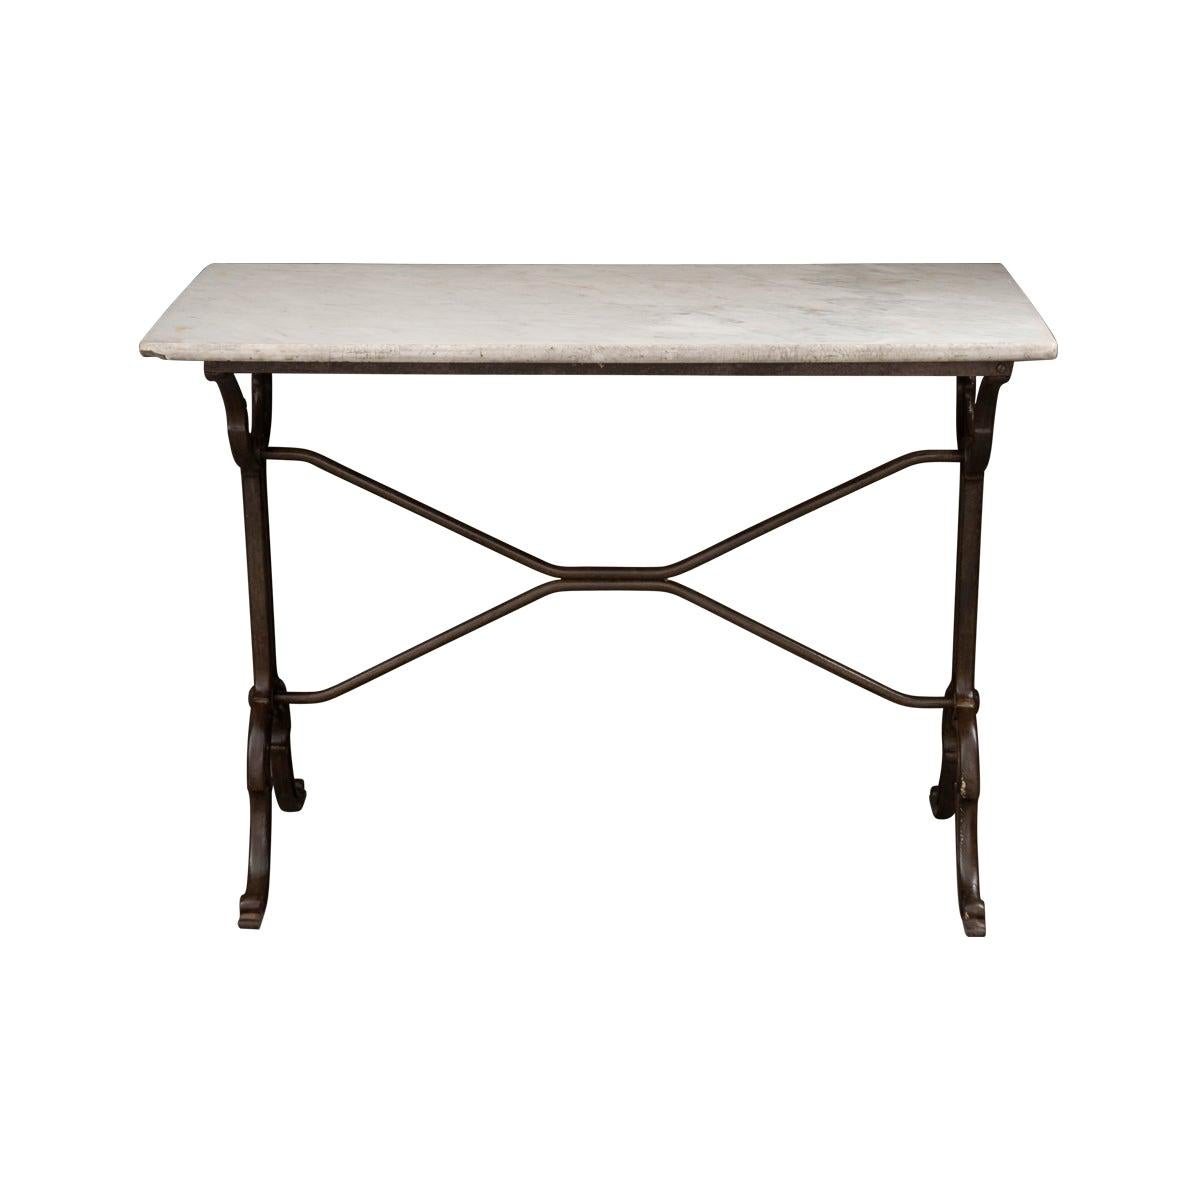 French 19th Century Marble-Top Garden Table